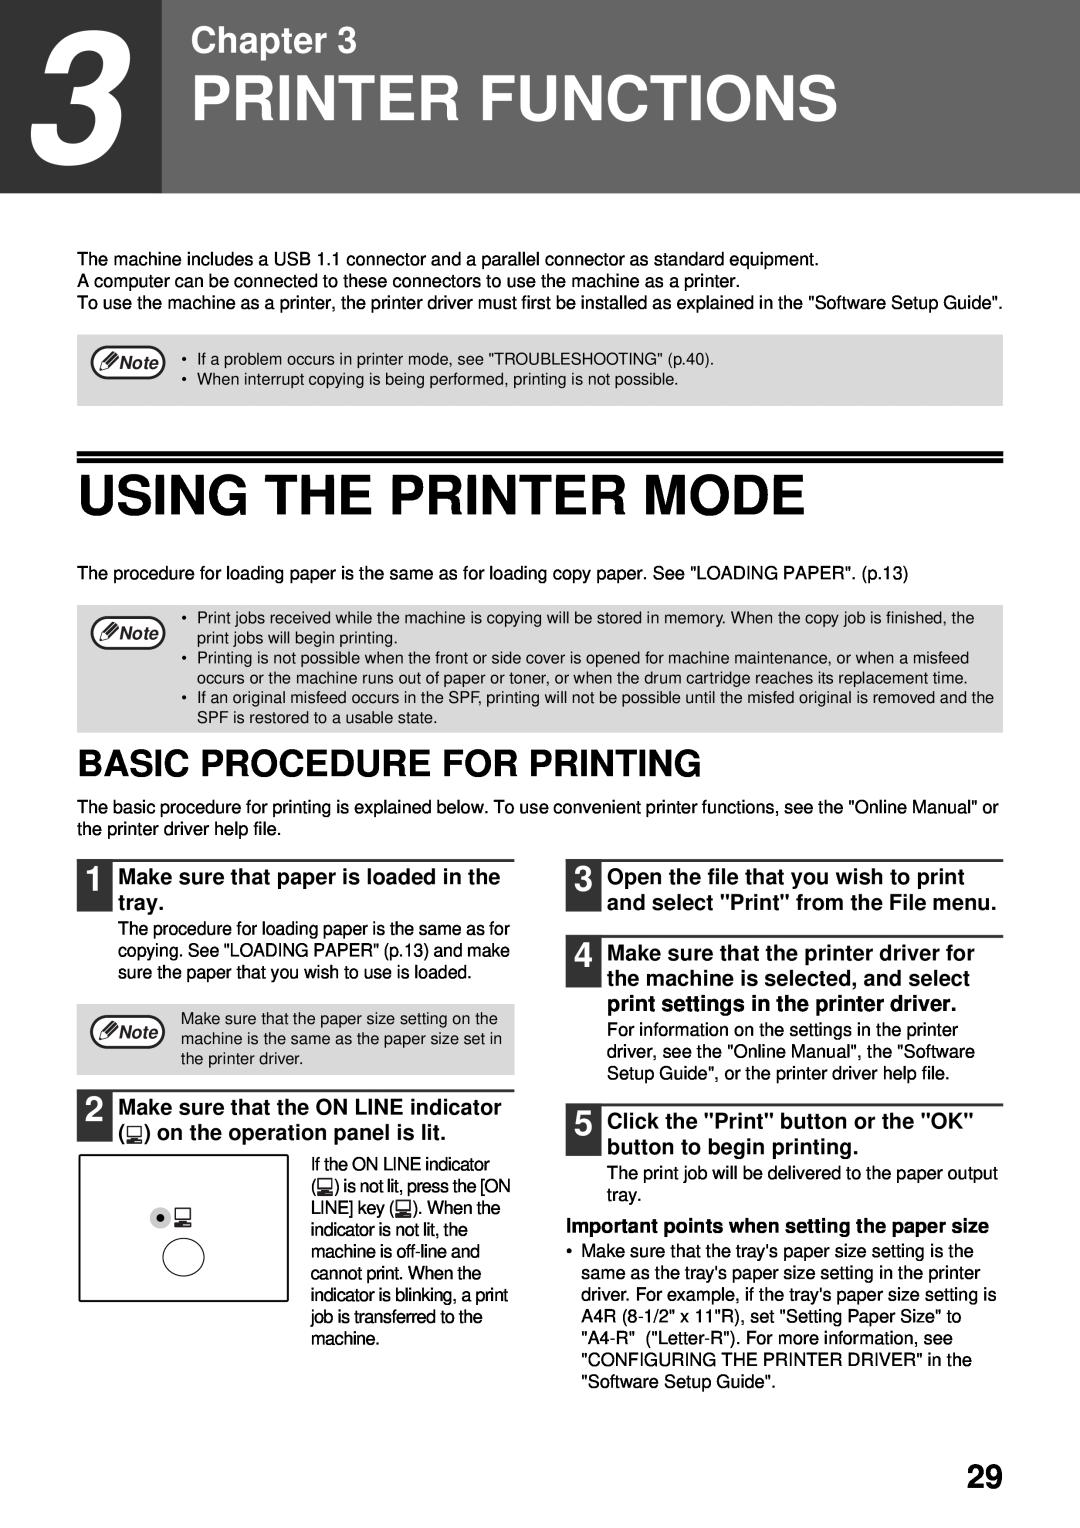 Olivetti 20W, 16W operation manual Printer Functions, Using The Printer Mode, Basic Procedure For Printing, Chapter 